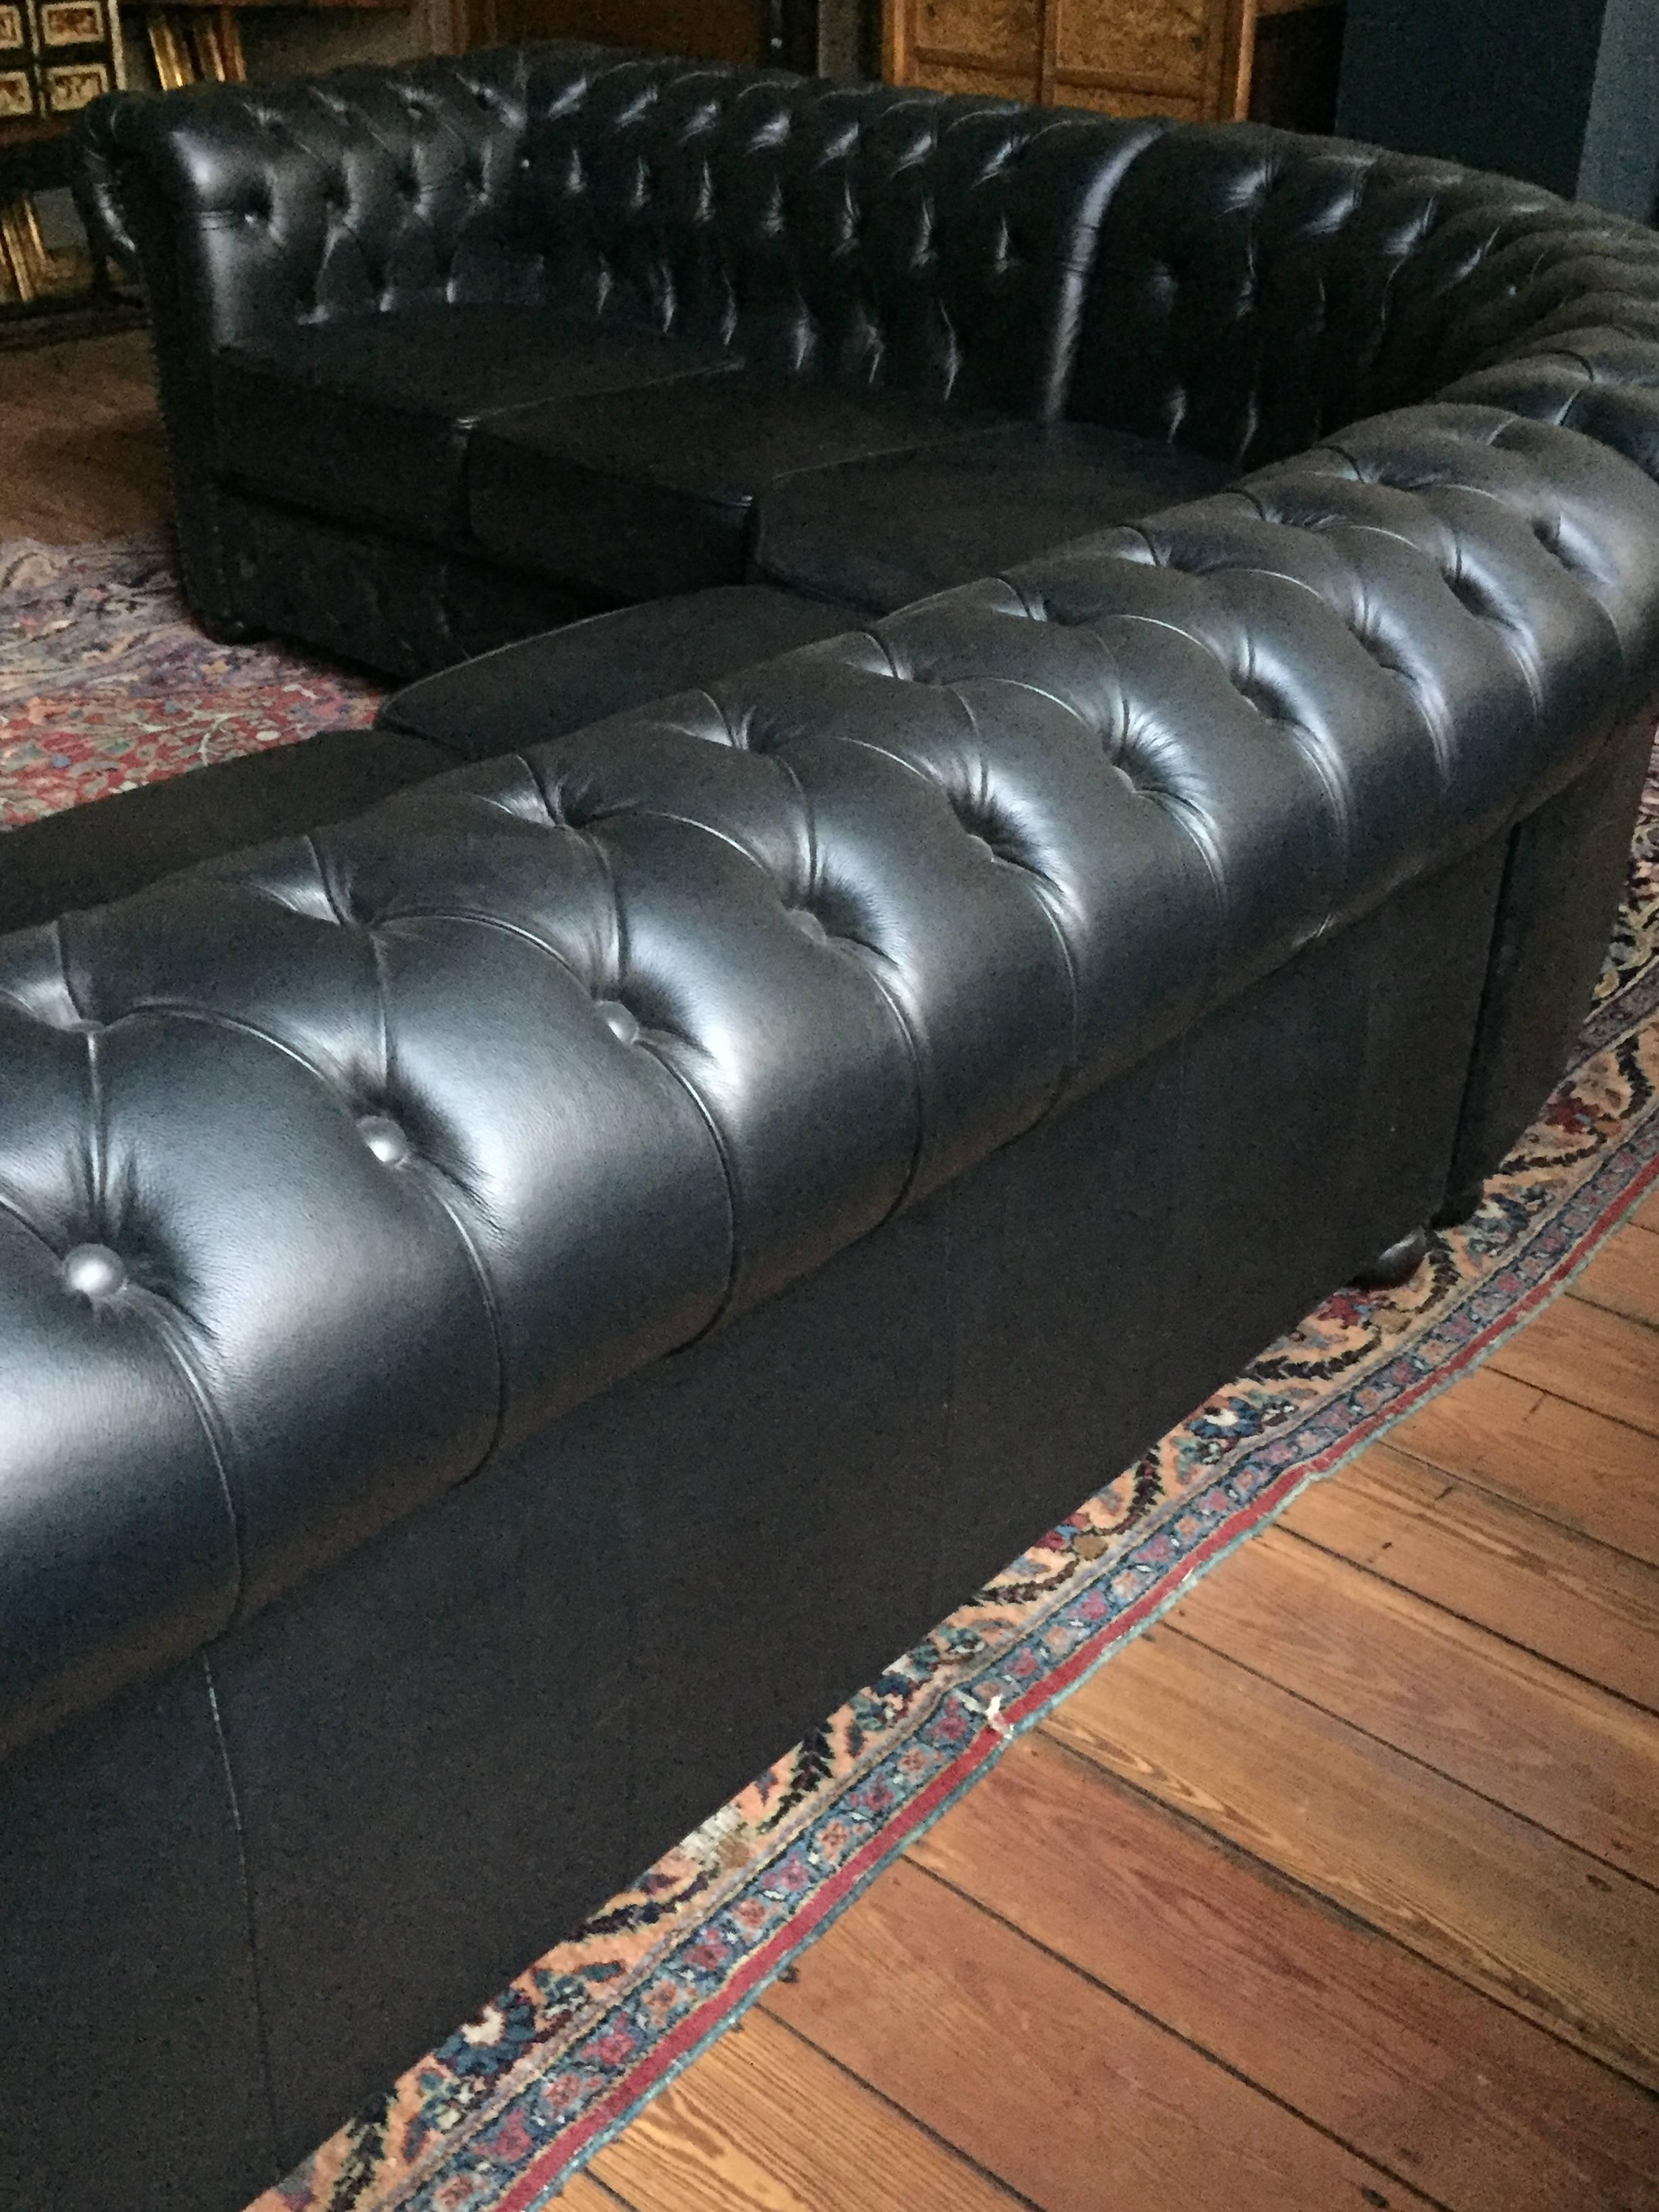 English Rochester Chesterfield sectional sofa in a two-seat x three-seat L shape. Black leather with brass nailhead detailing and wood bun feet. In absolutely excellent condition; purchased about 20 years ago to be used in a Belgian Parliament